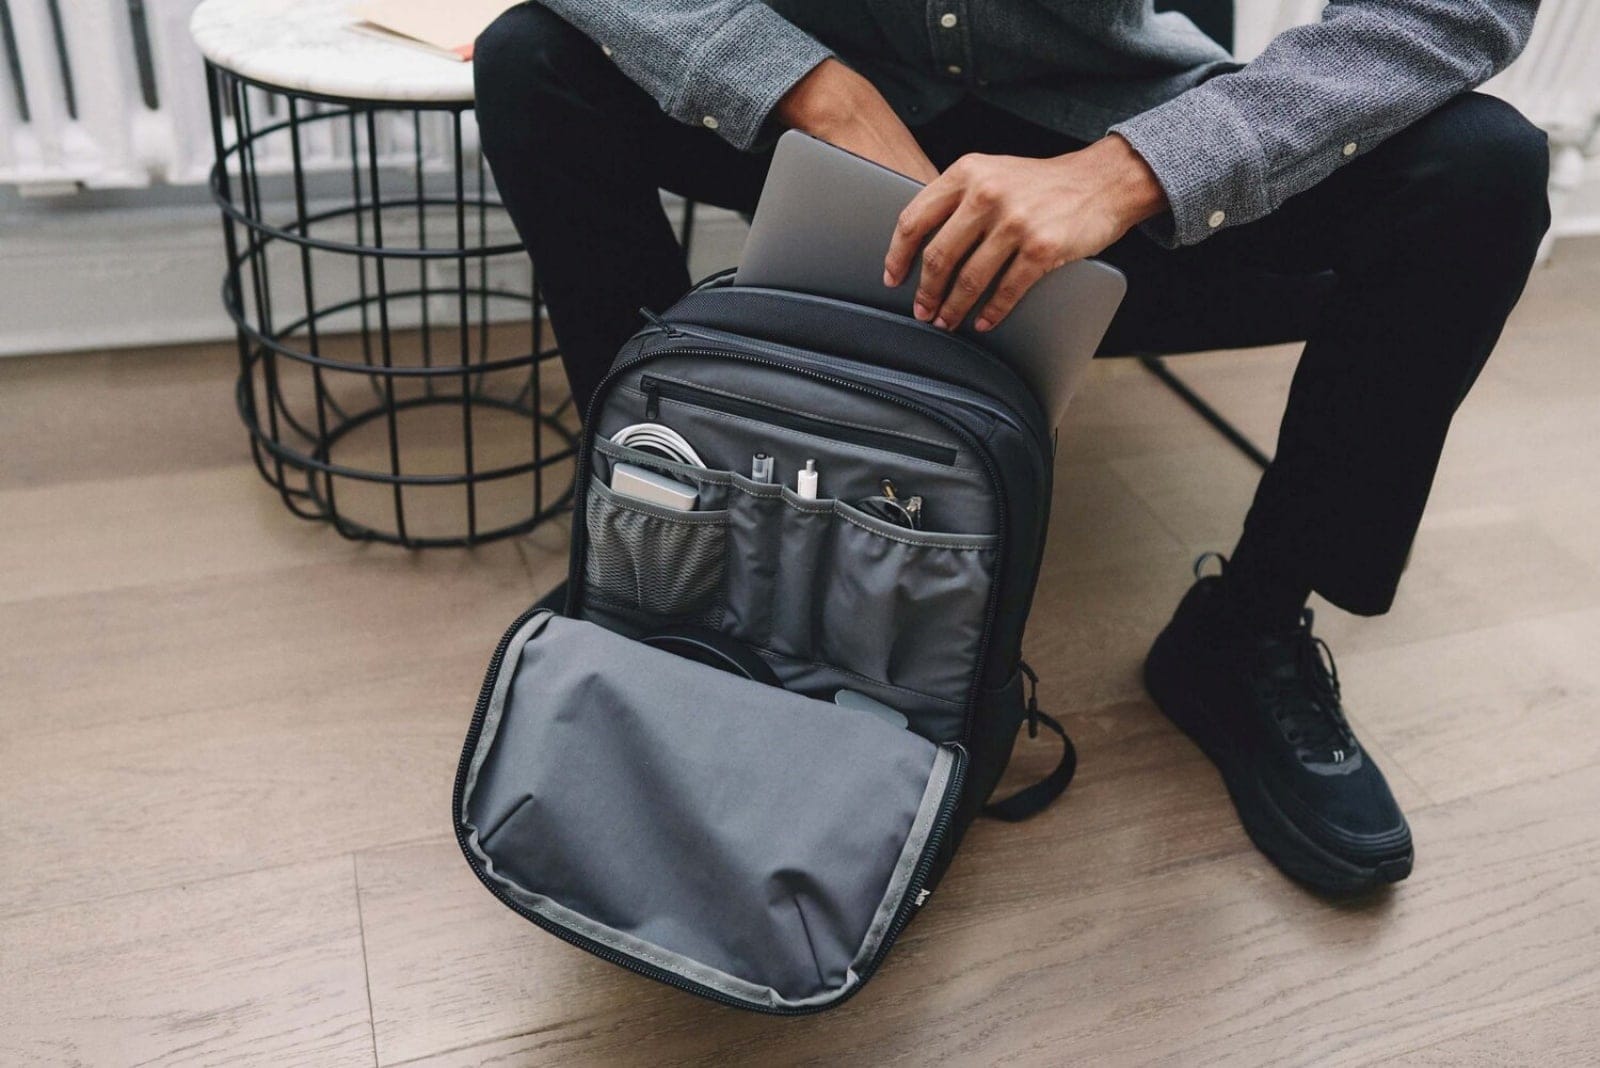 15 Best Laptop Bags for Women for Commuting in Style